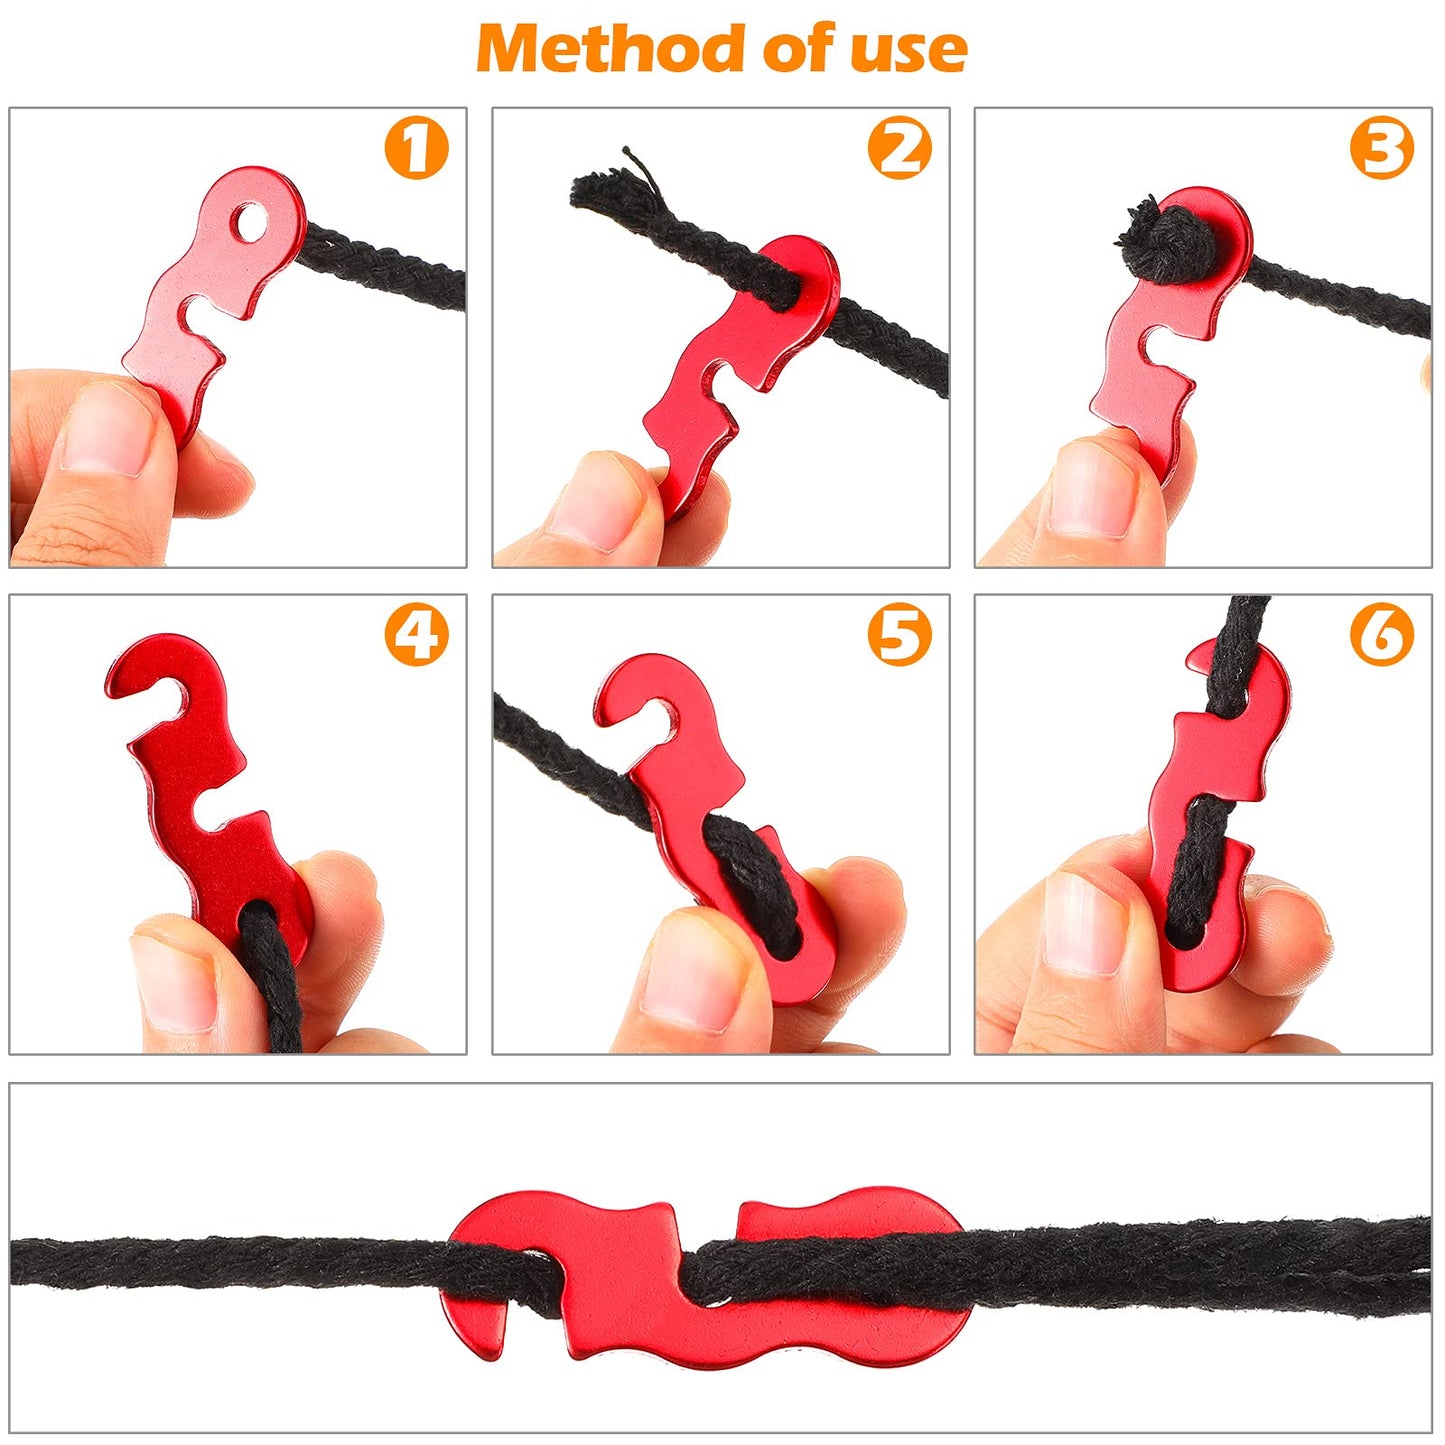 30 Pieces Aluminum Alloy Guyline Cord Adjusters Rope Adjusters Tent Tensioners Tent Wind Rope Buckles Camping Accessories for Tent Camping Hiking Backpacking Outdoor Activity (Red, Black, Silver)